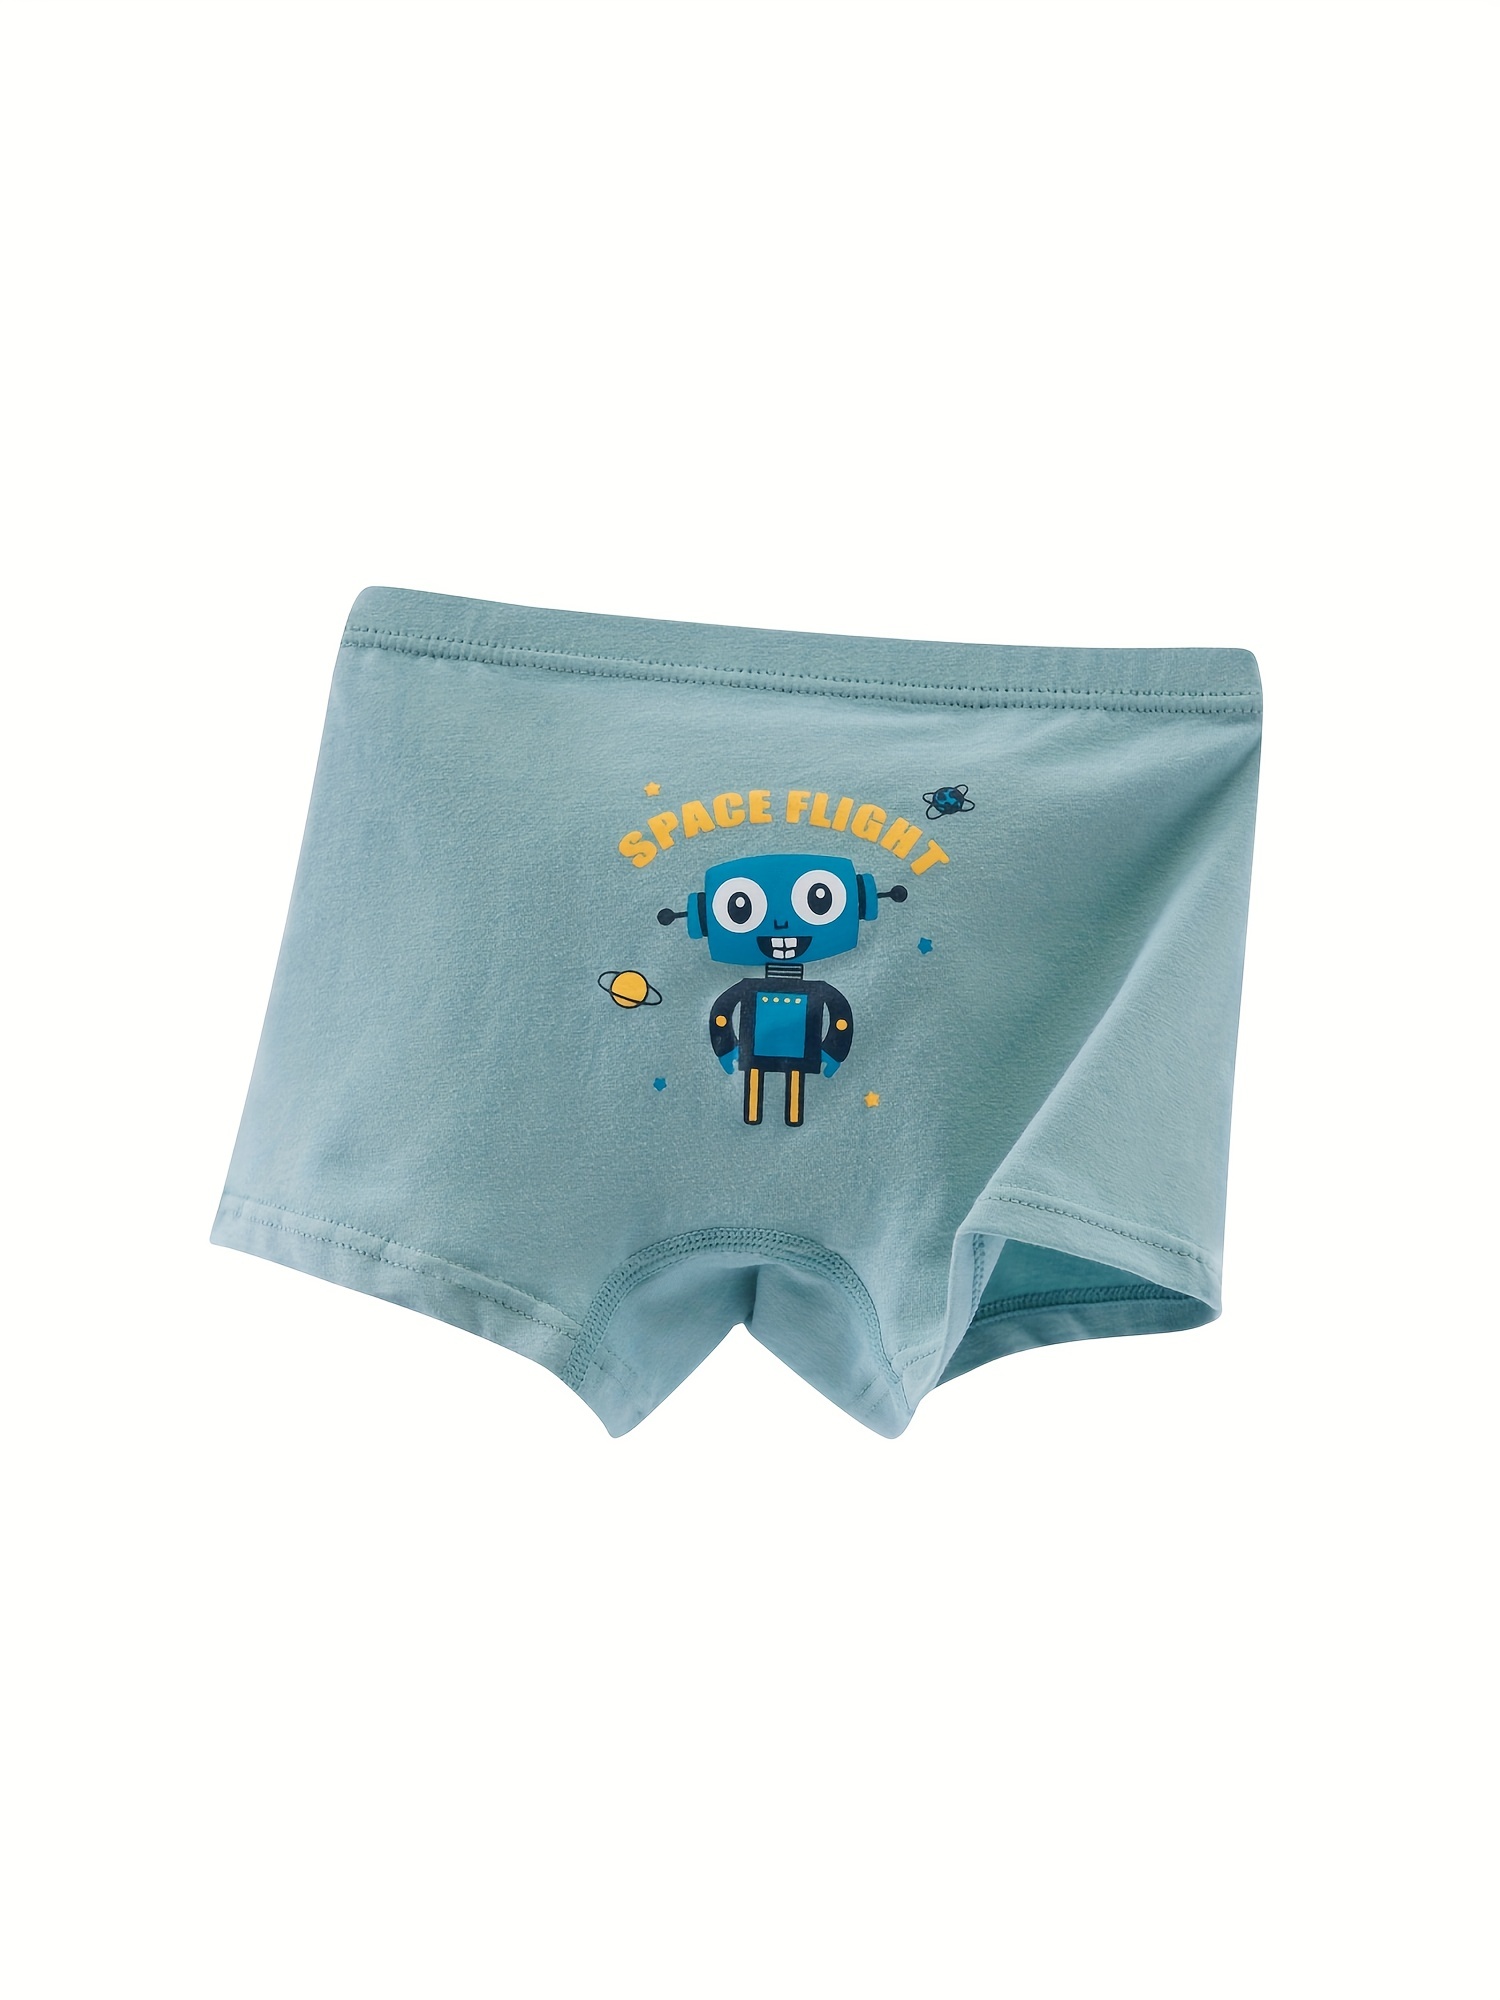 Breathable Blue Striped Cotton Boxers For Baby Boys Cartoon Football Print  Low Rise Shorts And Underwear For Teenage Boys 210622 From Cong05, $13.23